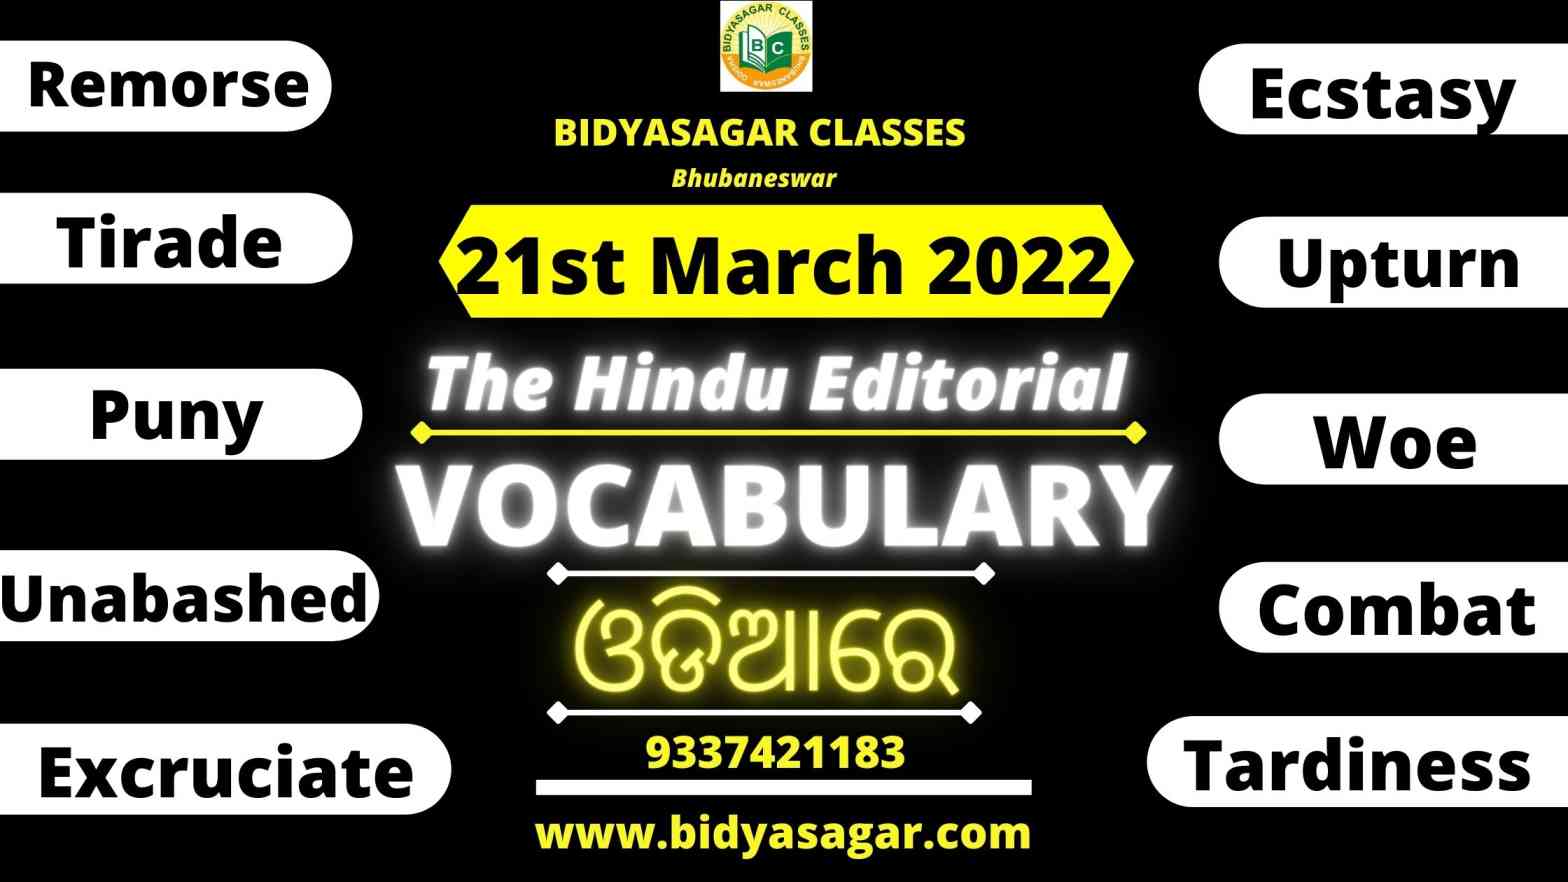 The Hindu Editorial Vocabulary of 21st March 2022